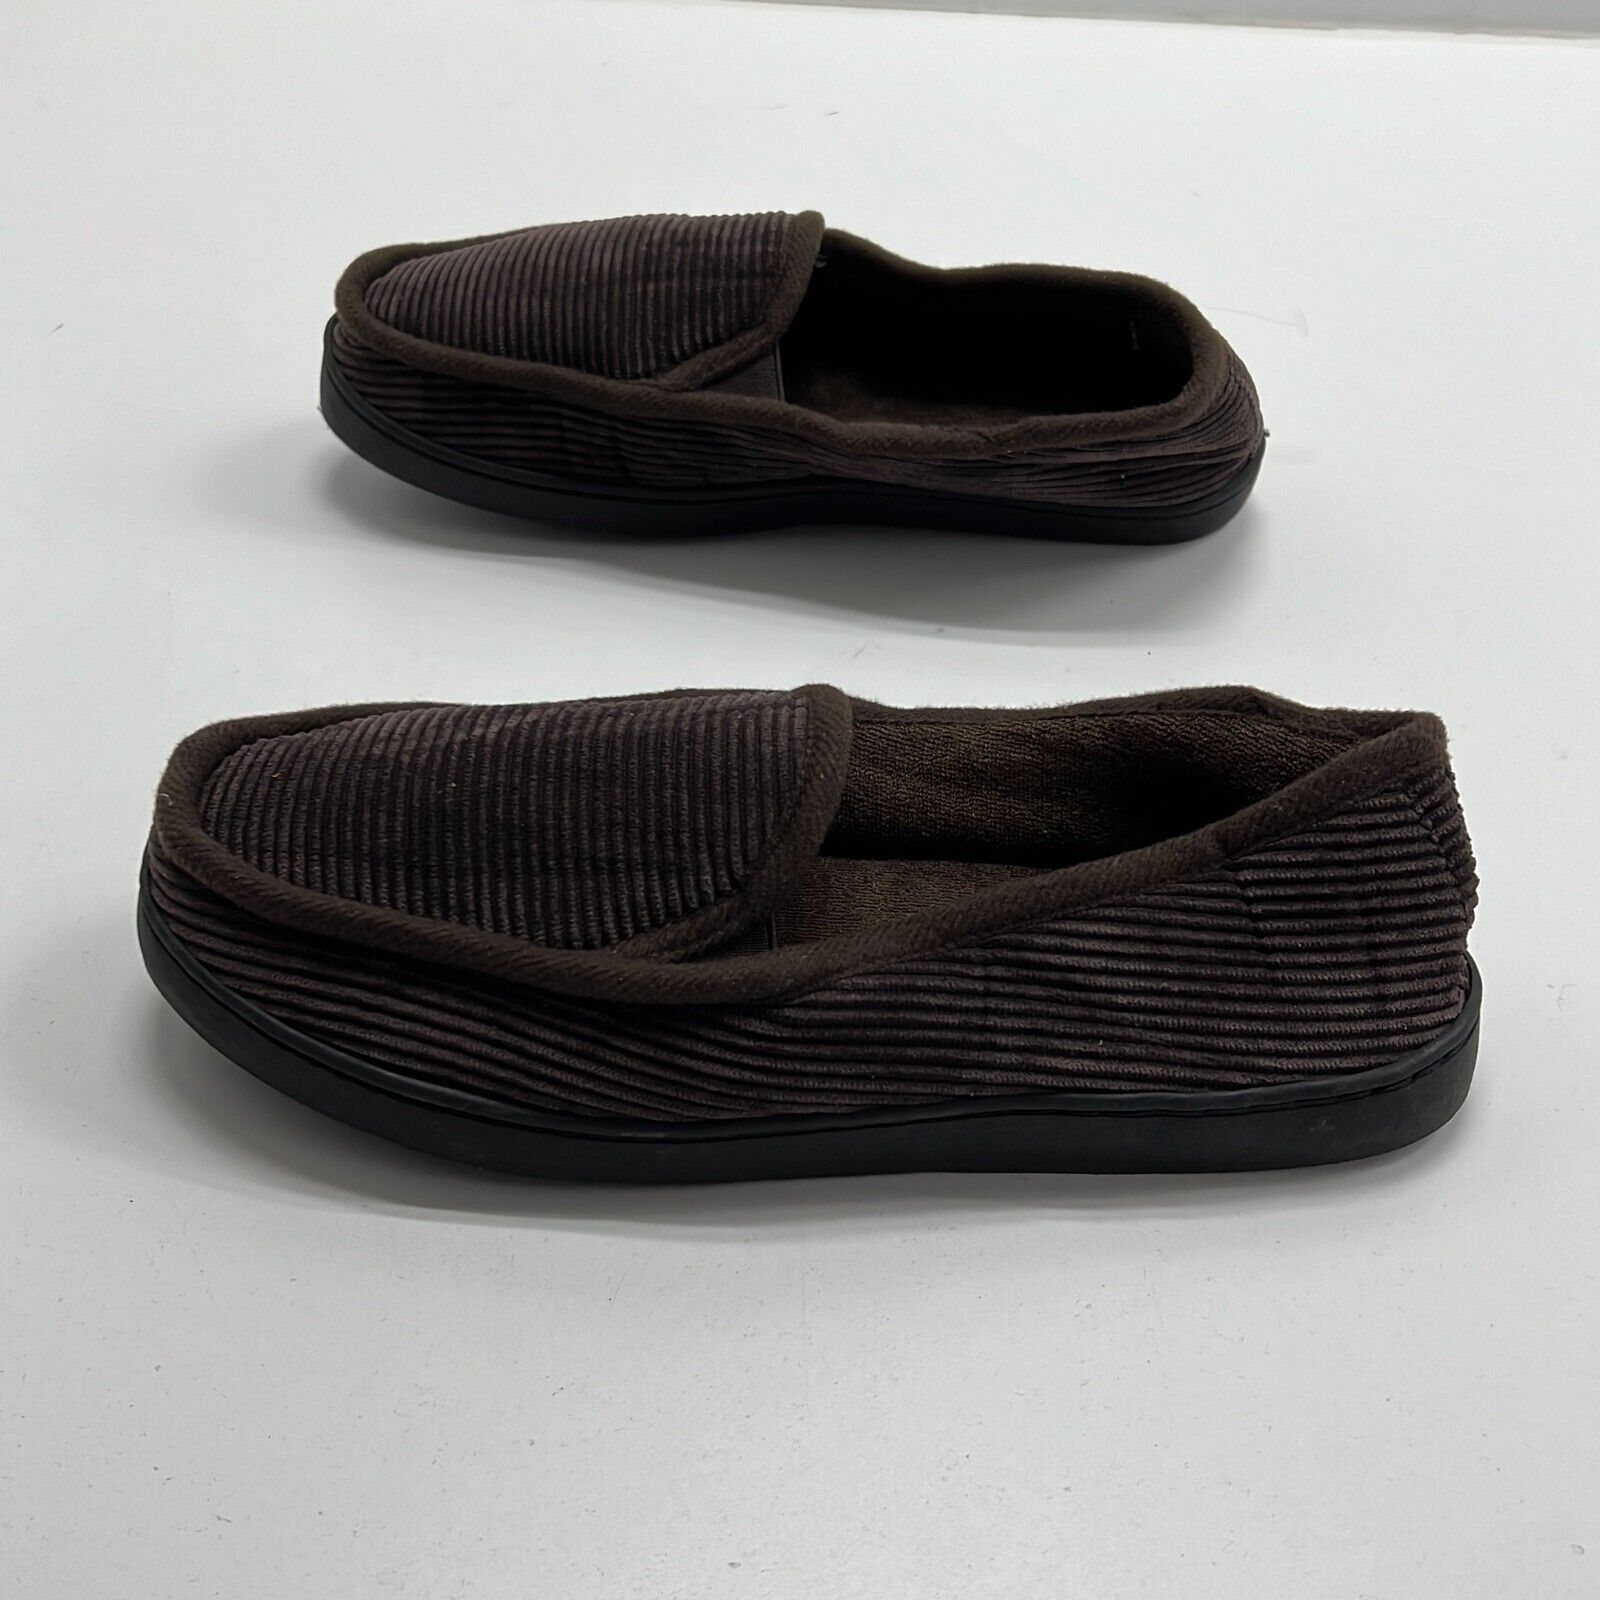 King Size Men's Brown Round Toe Corduroy Moccasin Slippers Size 9 EW NWOT